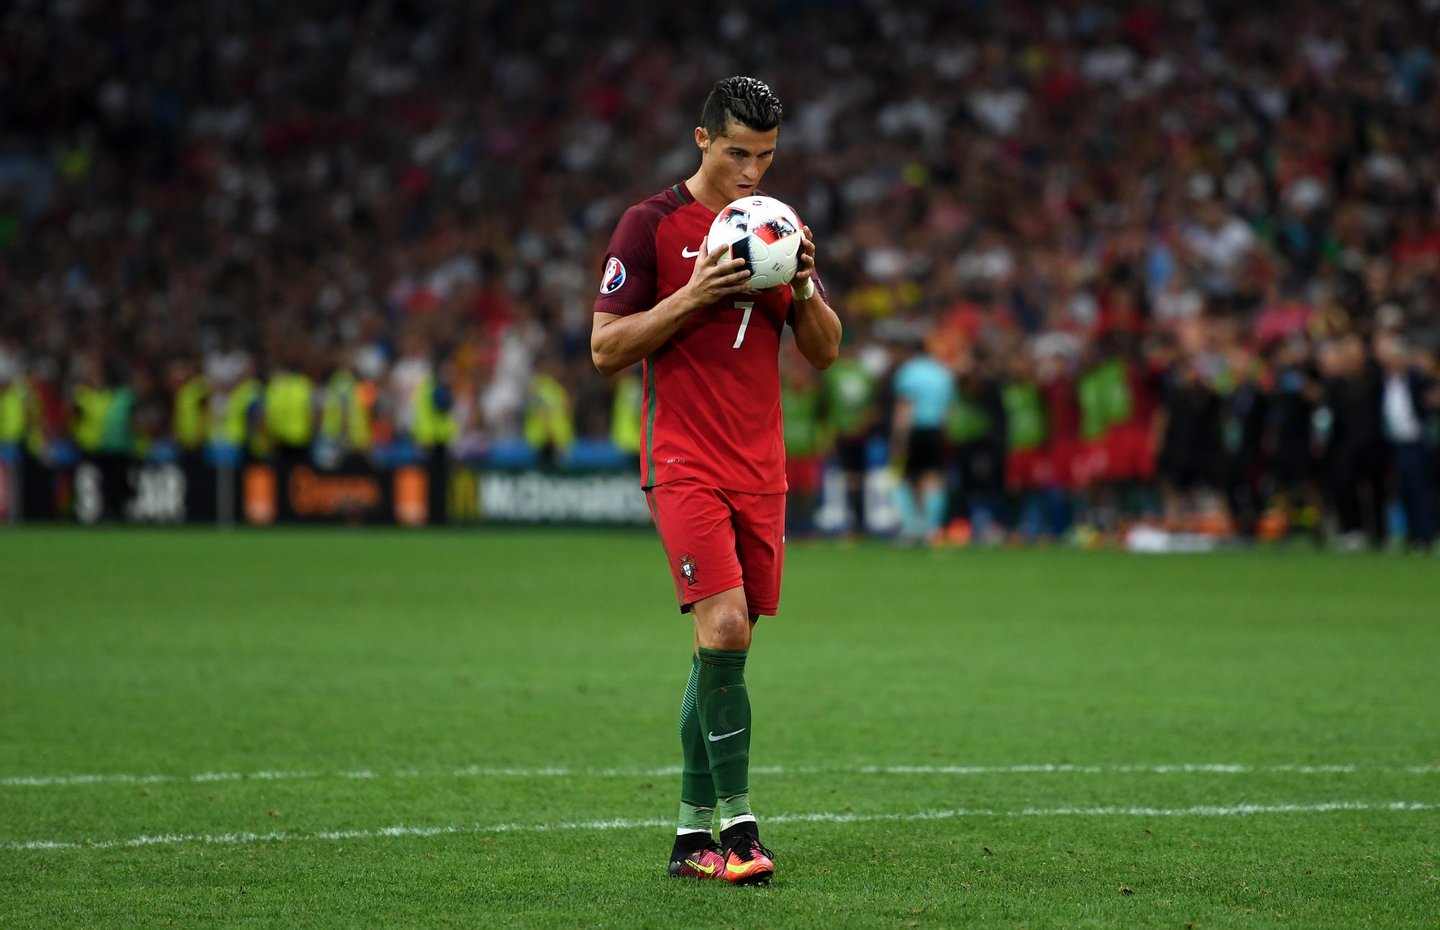 MARSEILLE, FRANCE - JUNE 30: Cristiano Ronaldo of Portugal kisses the ball at the penalty shootout during the UEFA EURO 2016 quarter final match between Poland and Portugal at Stade Velodrome on June 30, 2016 in Marseille, France. (Photo by Laurence Griffiths/Getty Images)